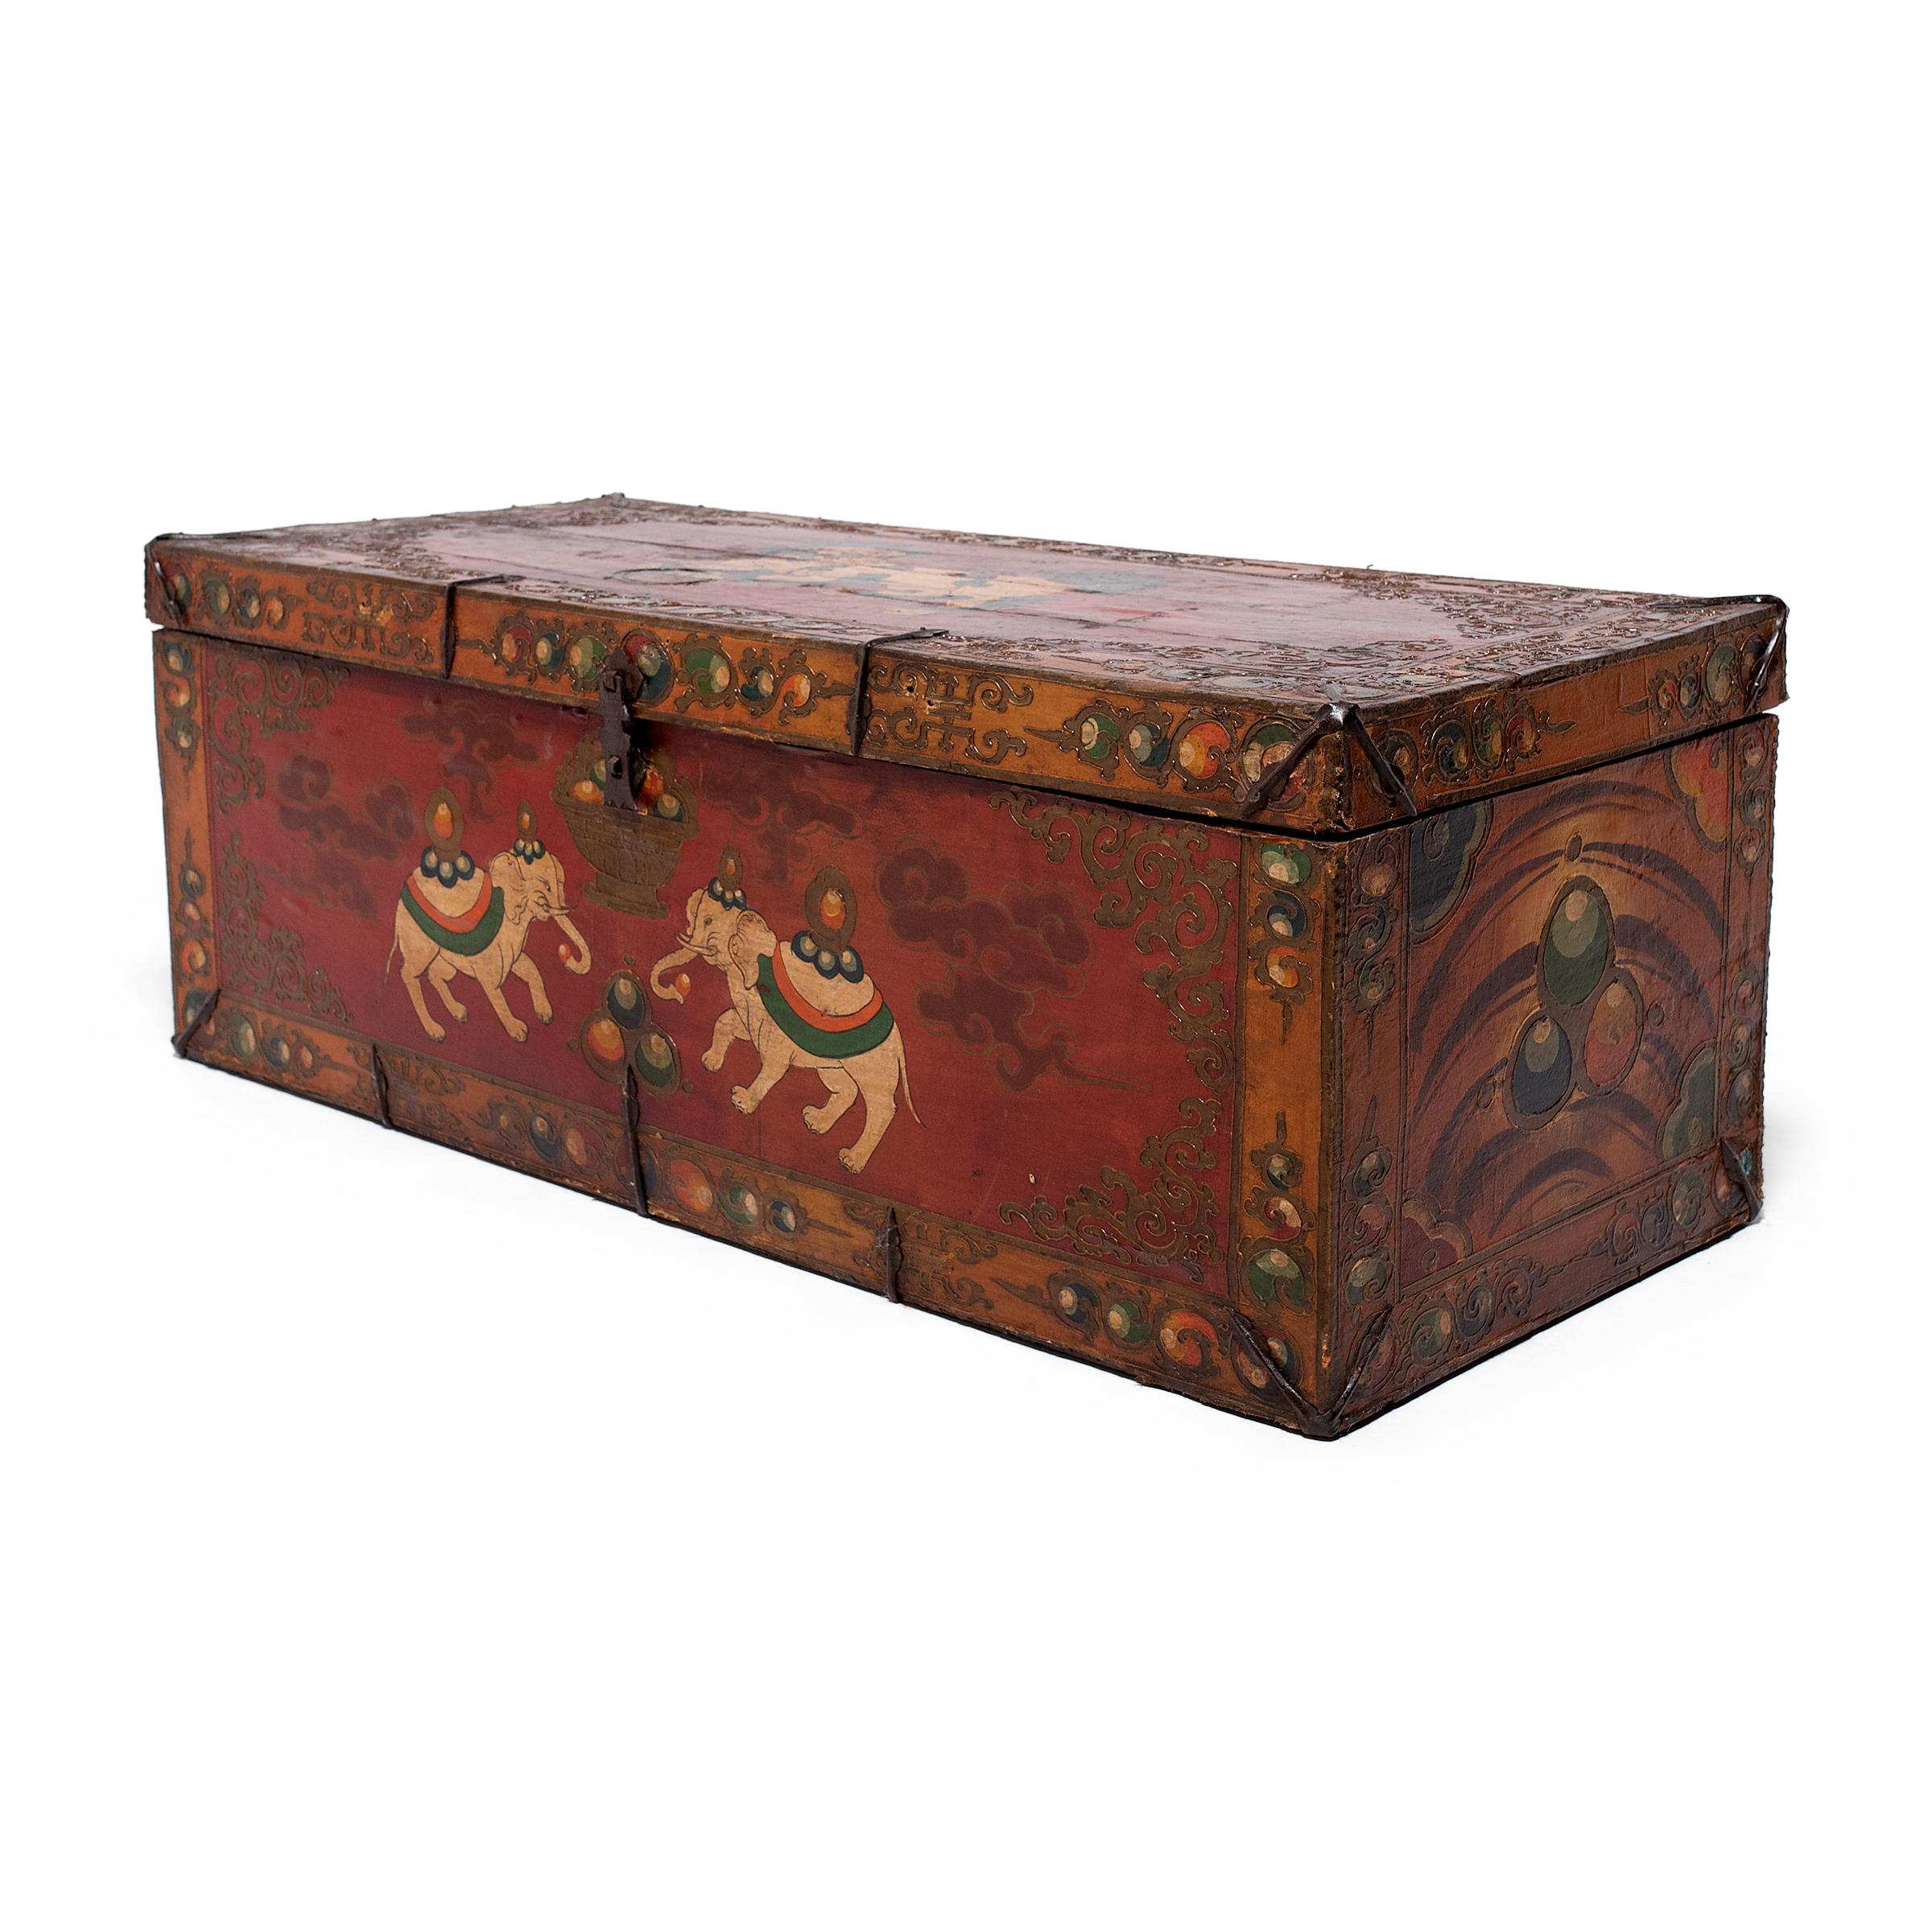 Lacquered Northern Chinese Painted Elephant Trunk, c. 1900